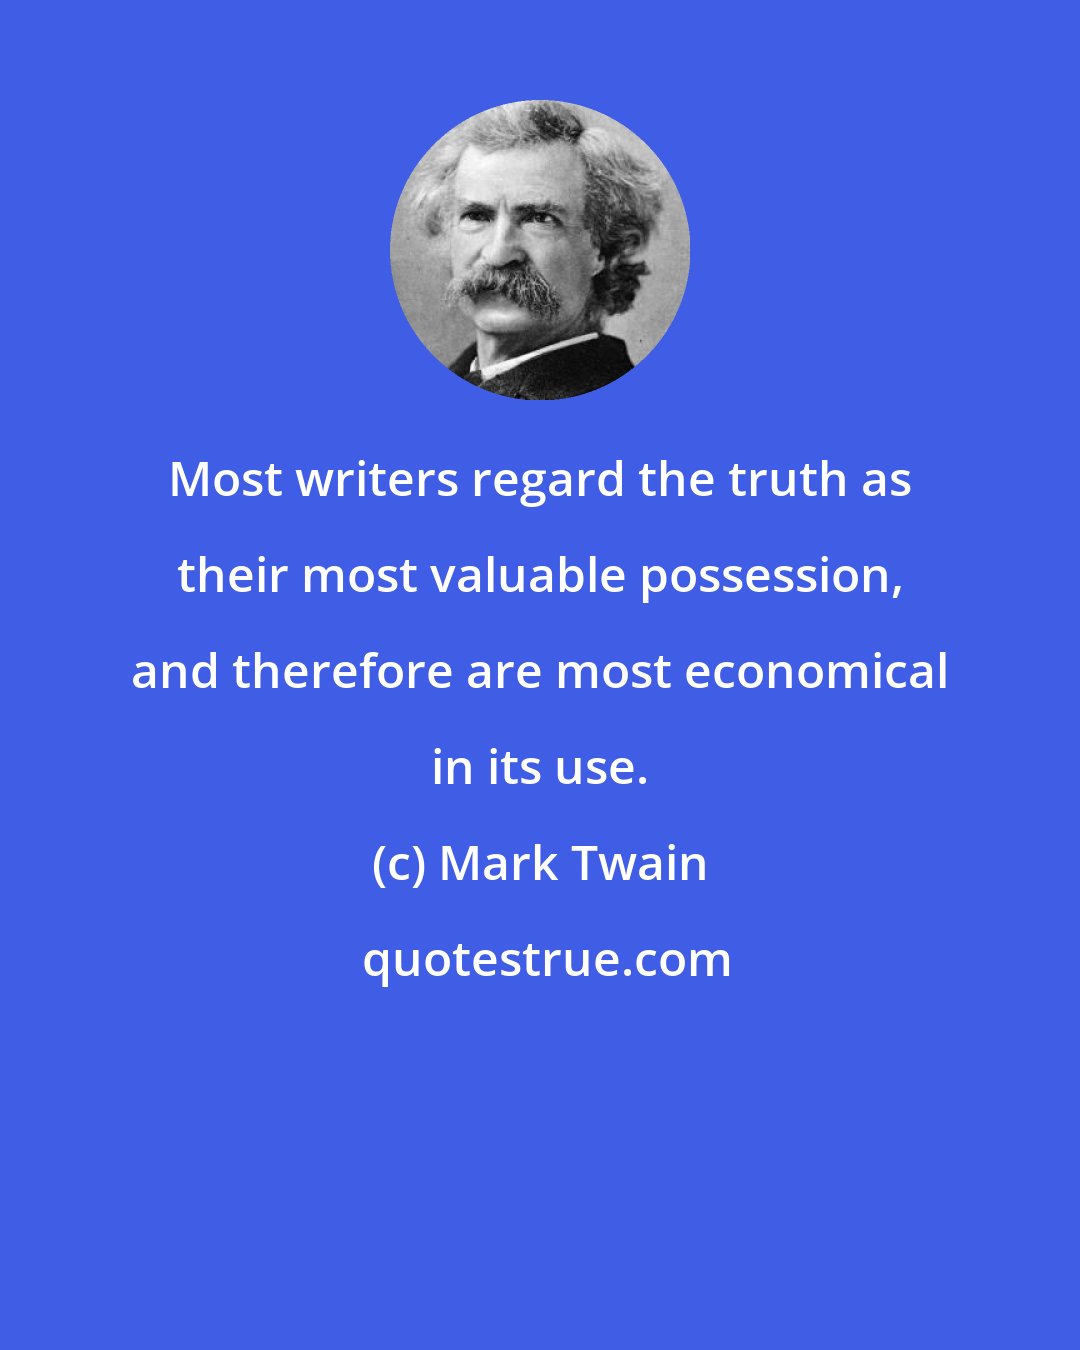 Mark Twain: Most writers regard the truth as their most valuable possession, and therefore are most economical in its use.